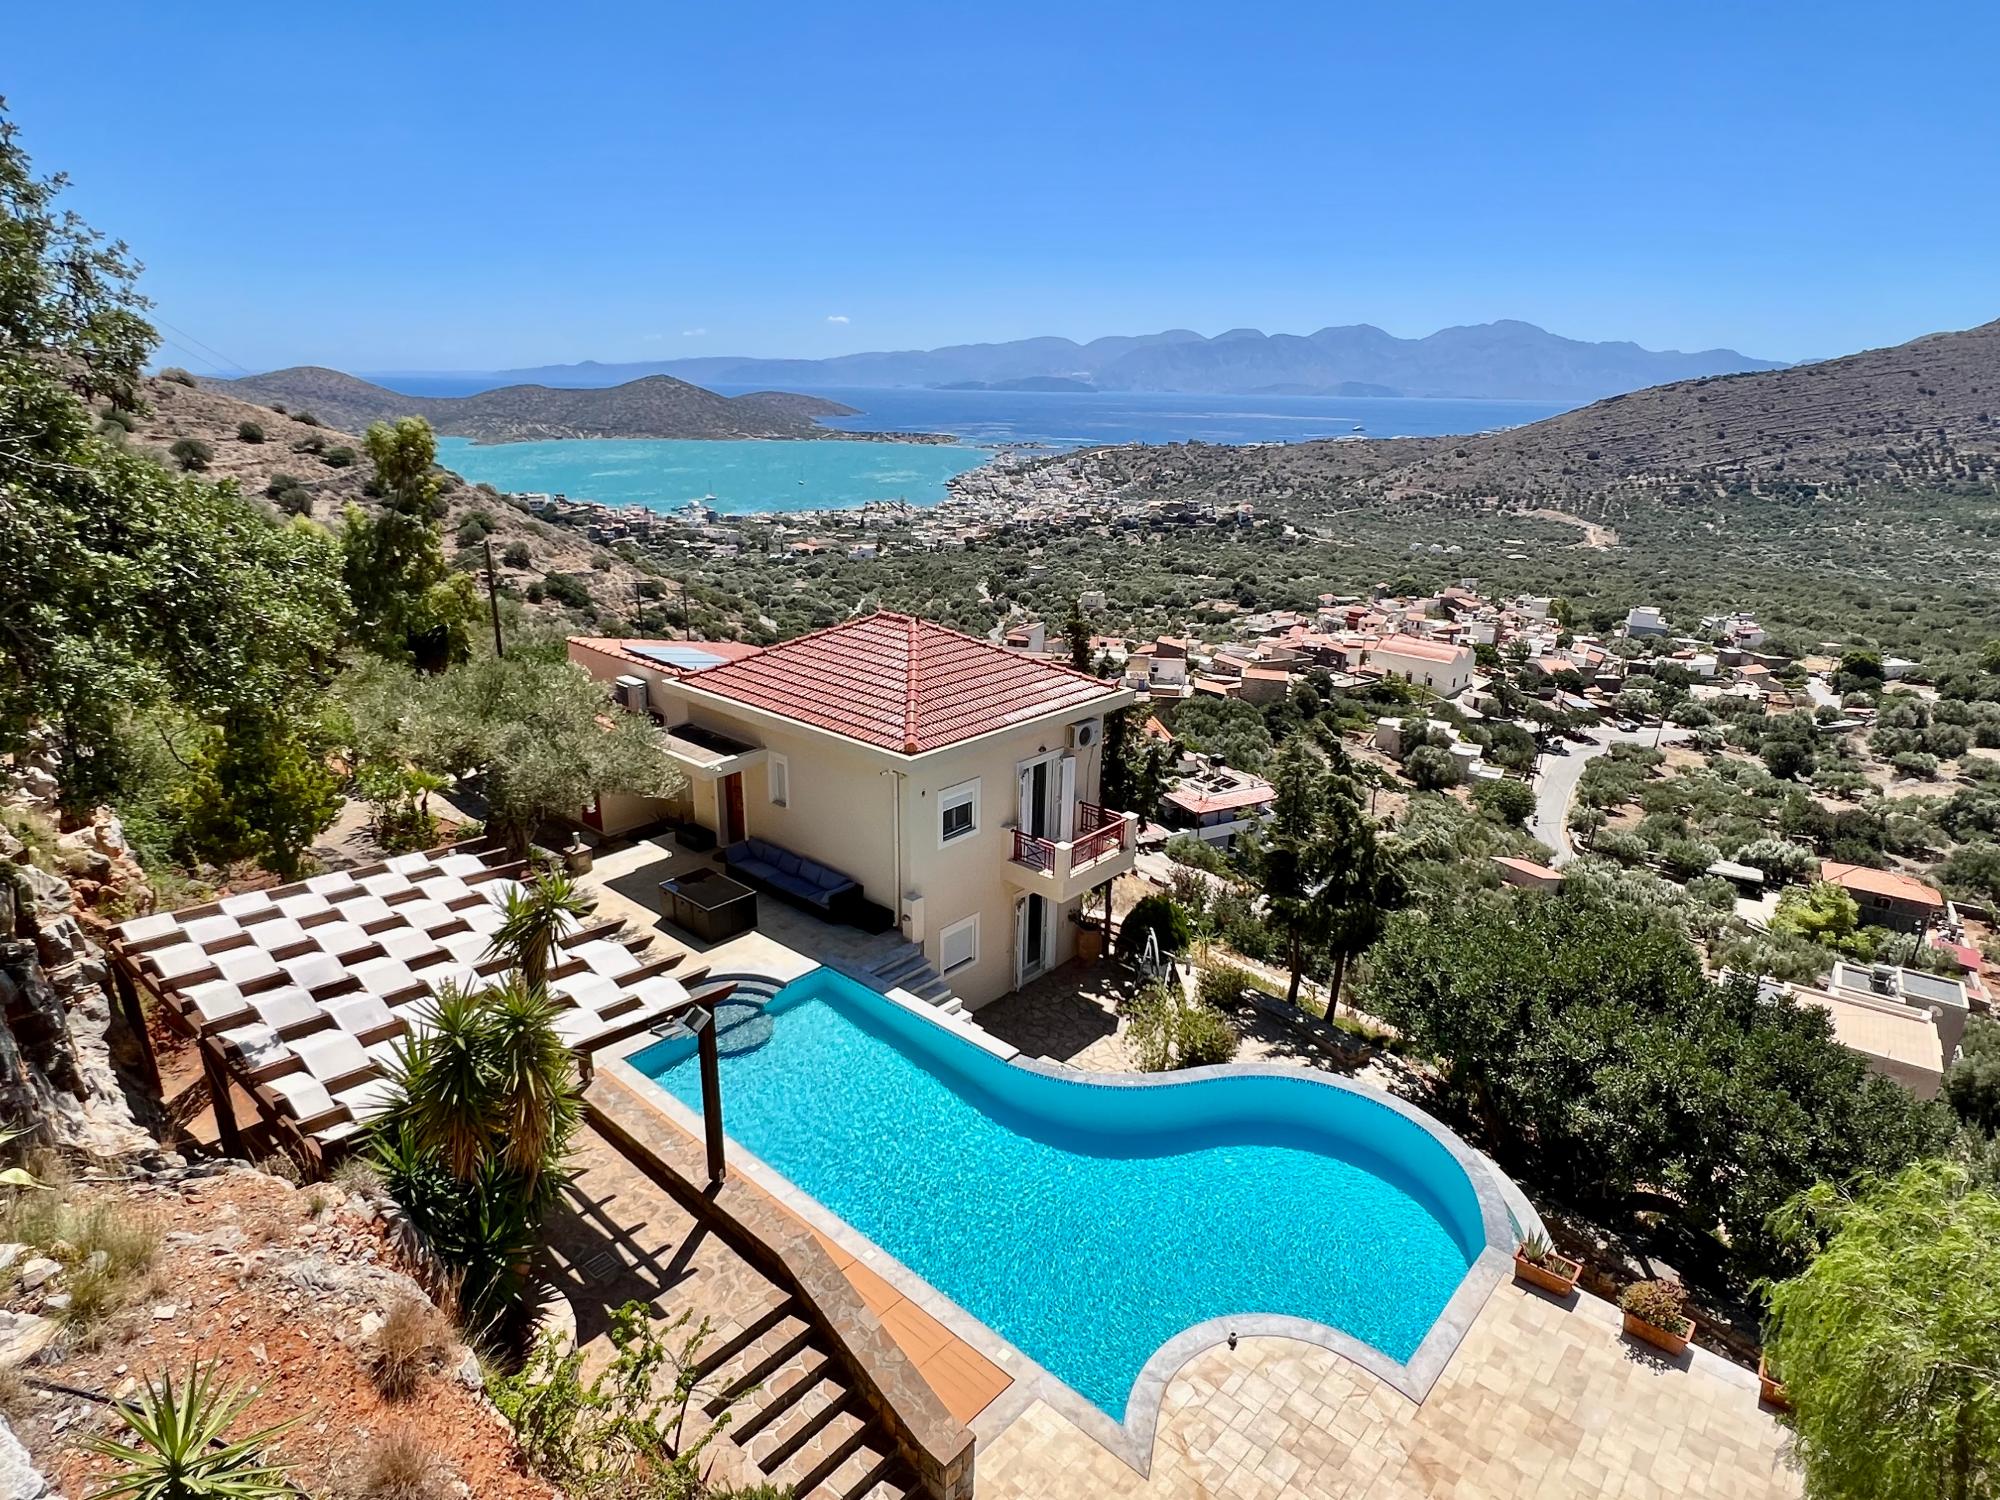 4 bedroom villa with spectacular views, pool and garden.